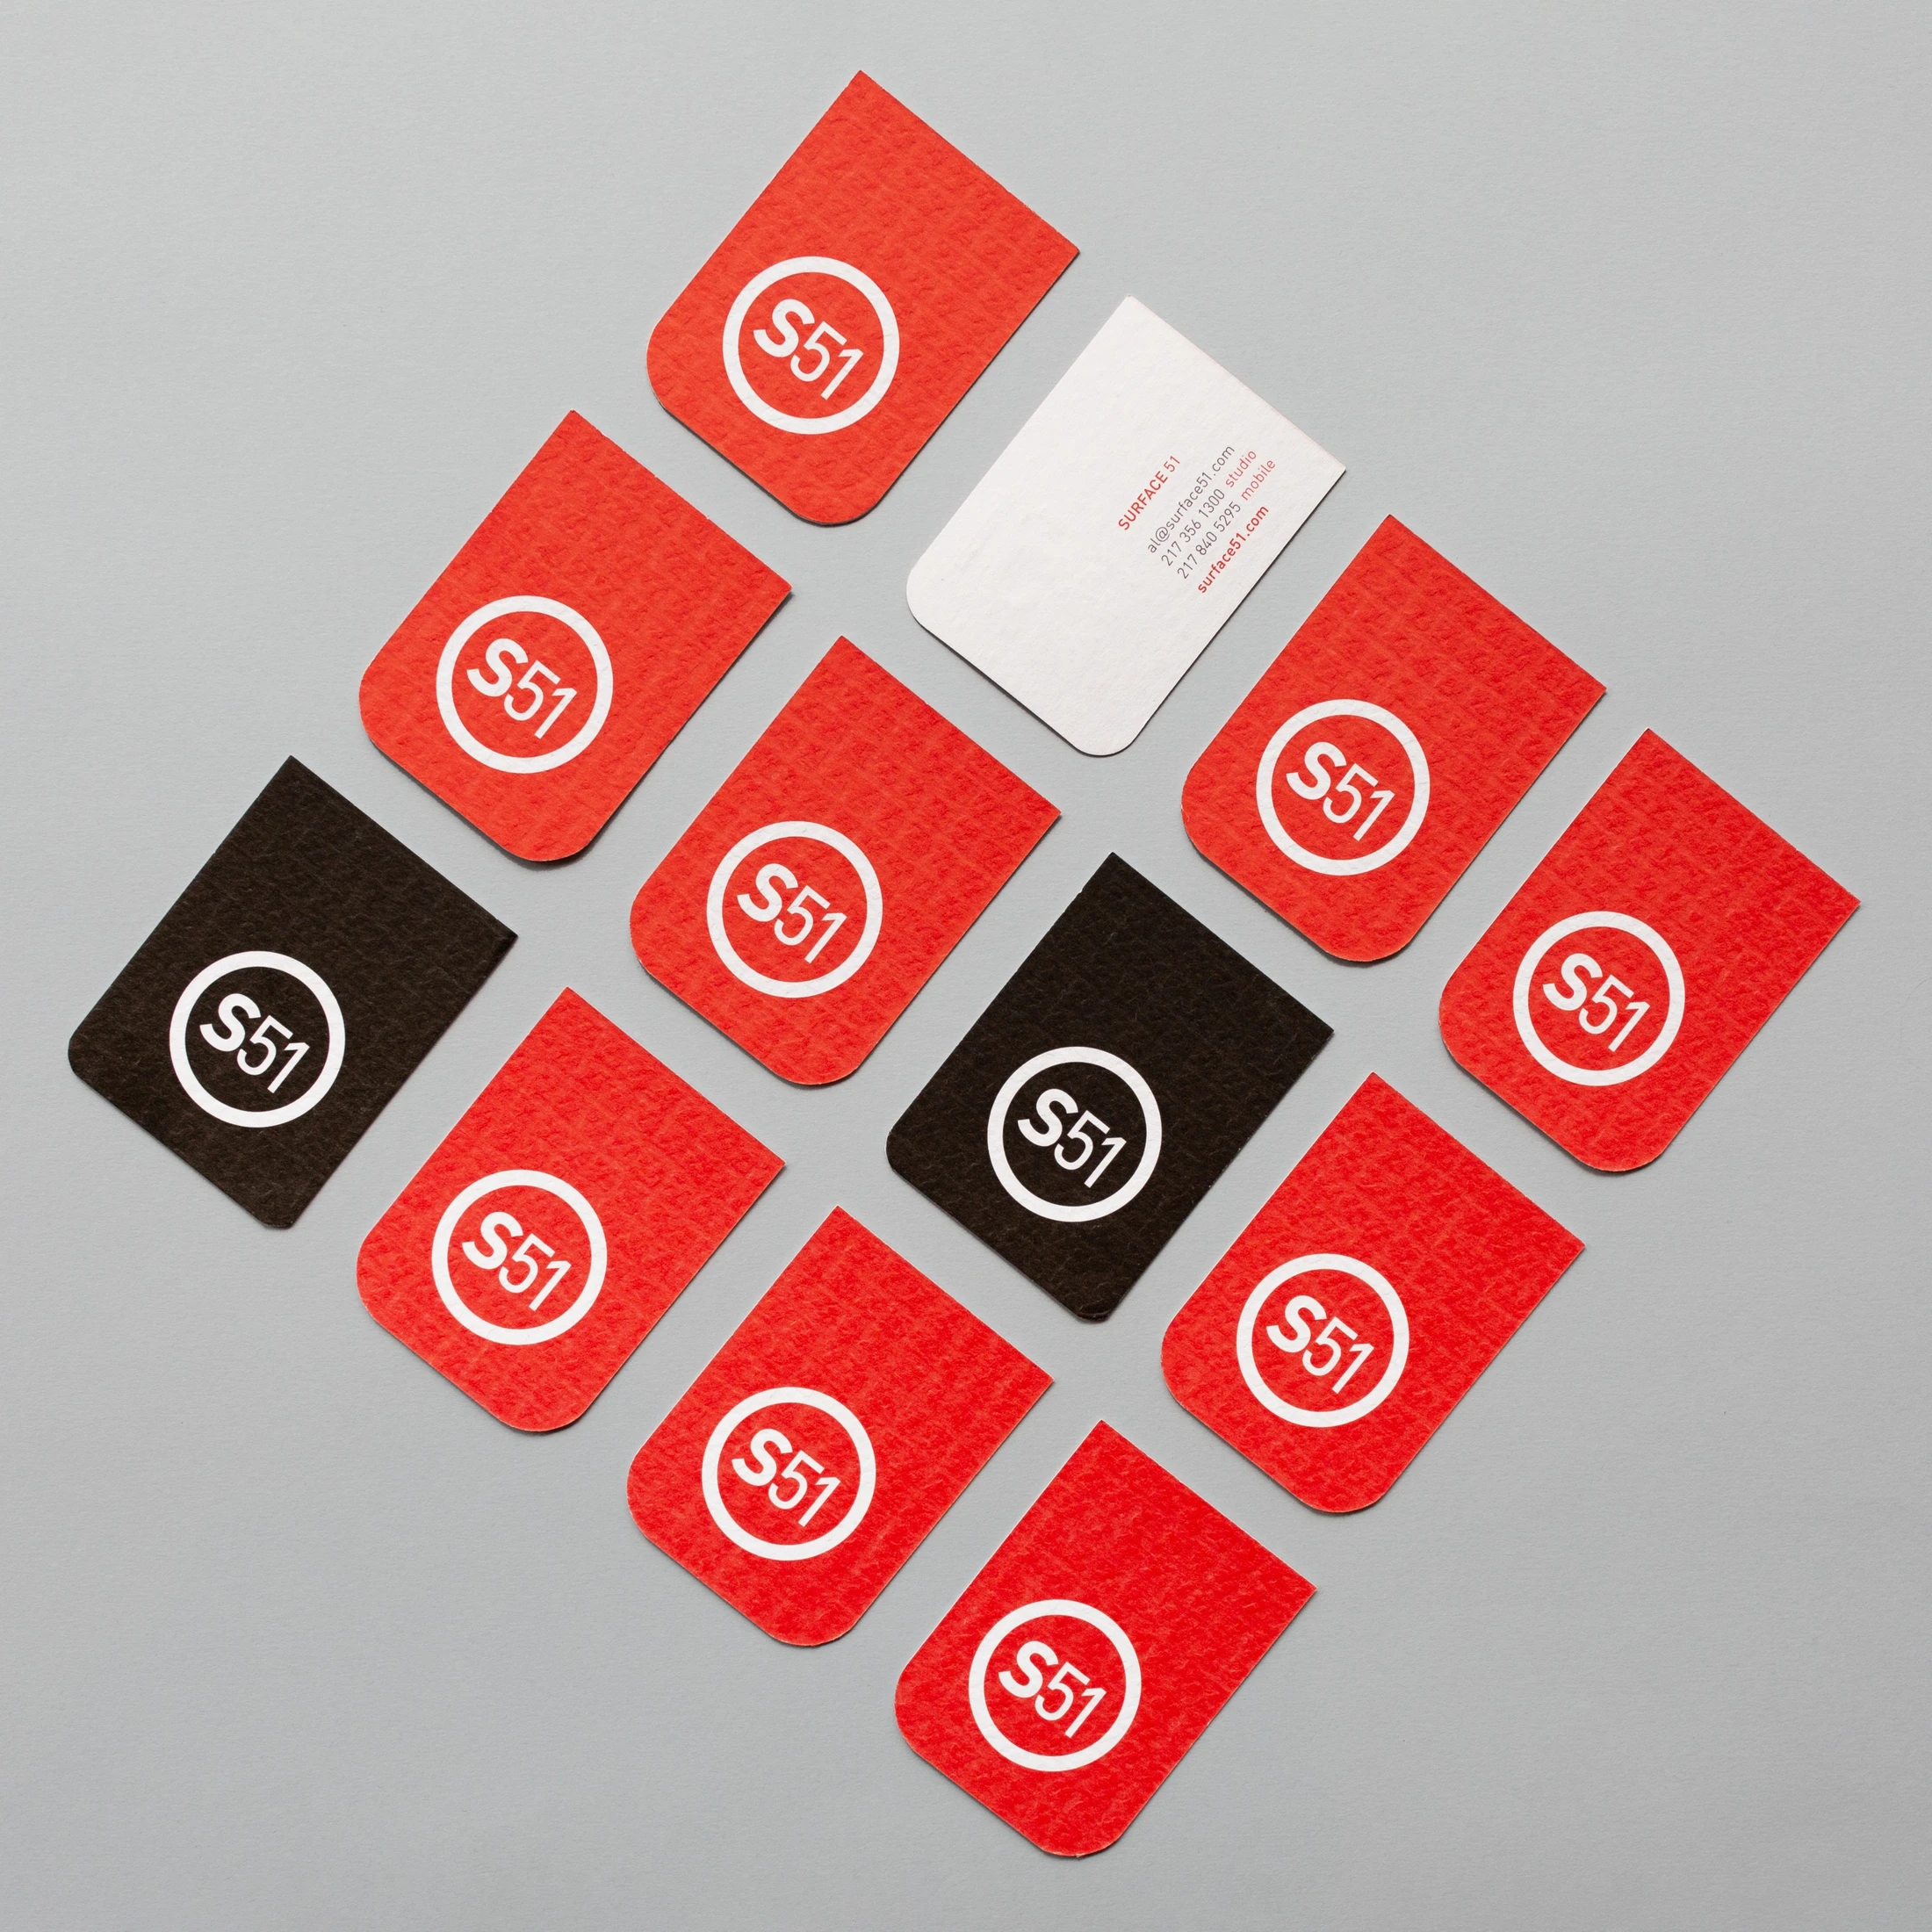 A set of business cards with red and black circles.